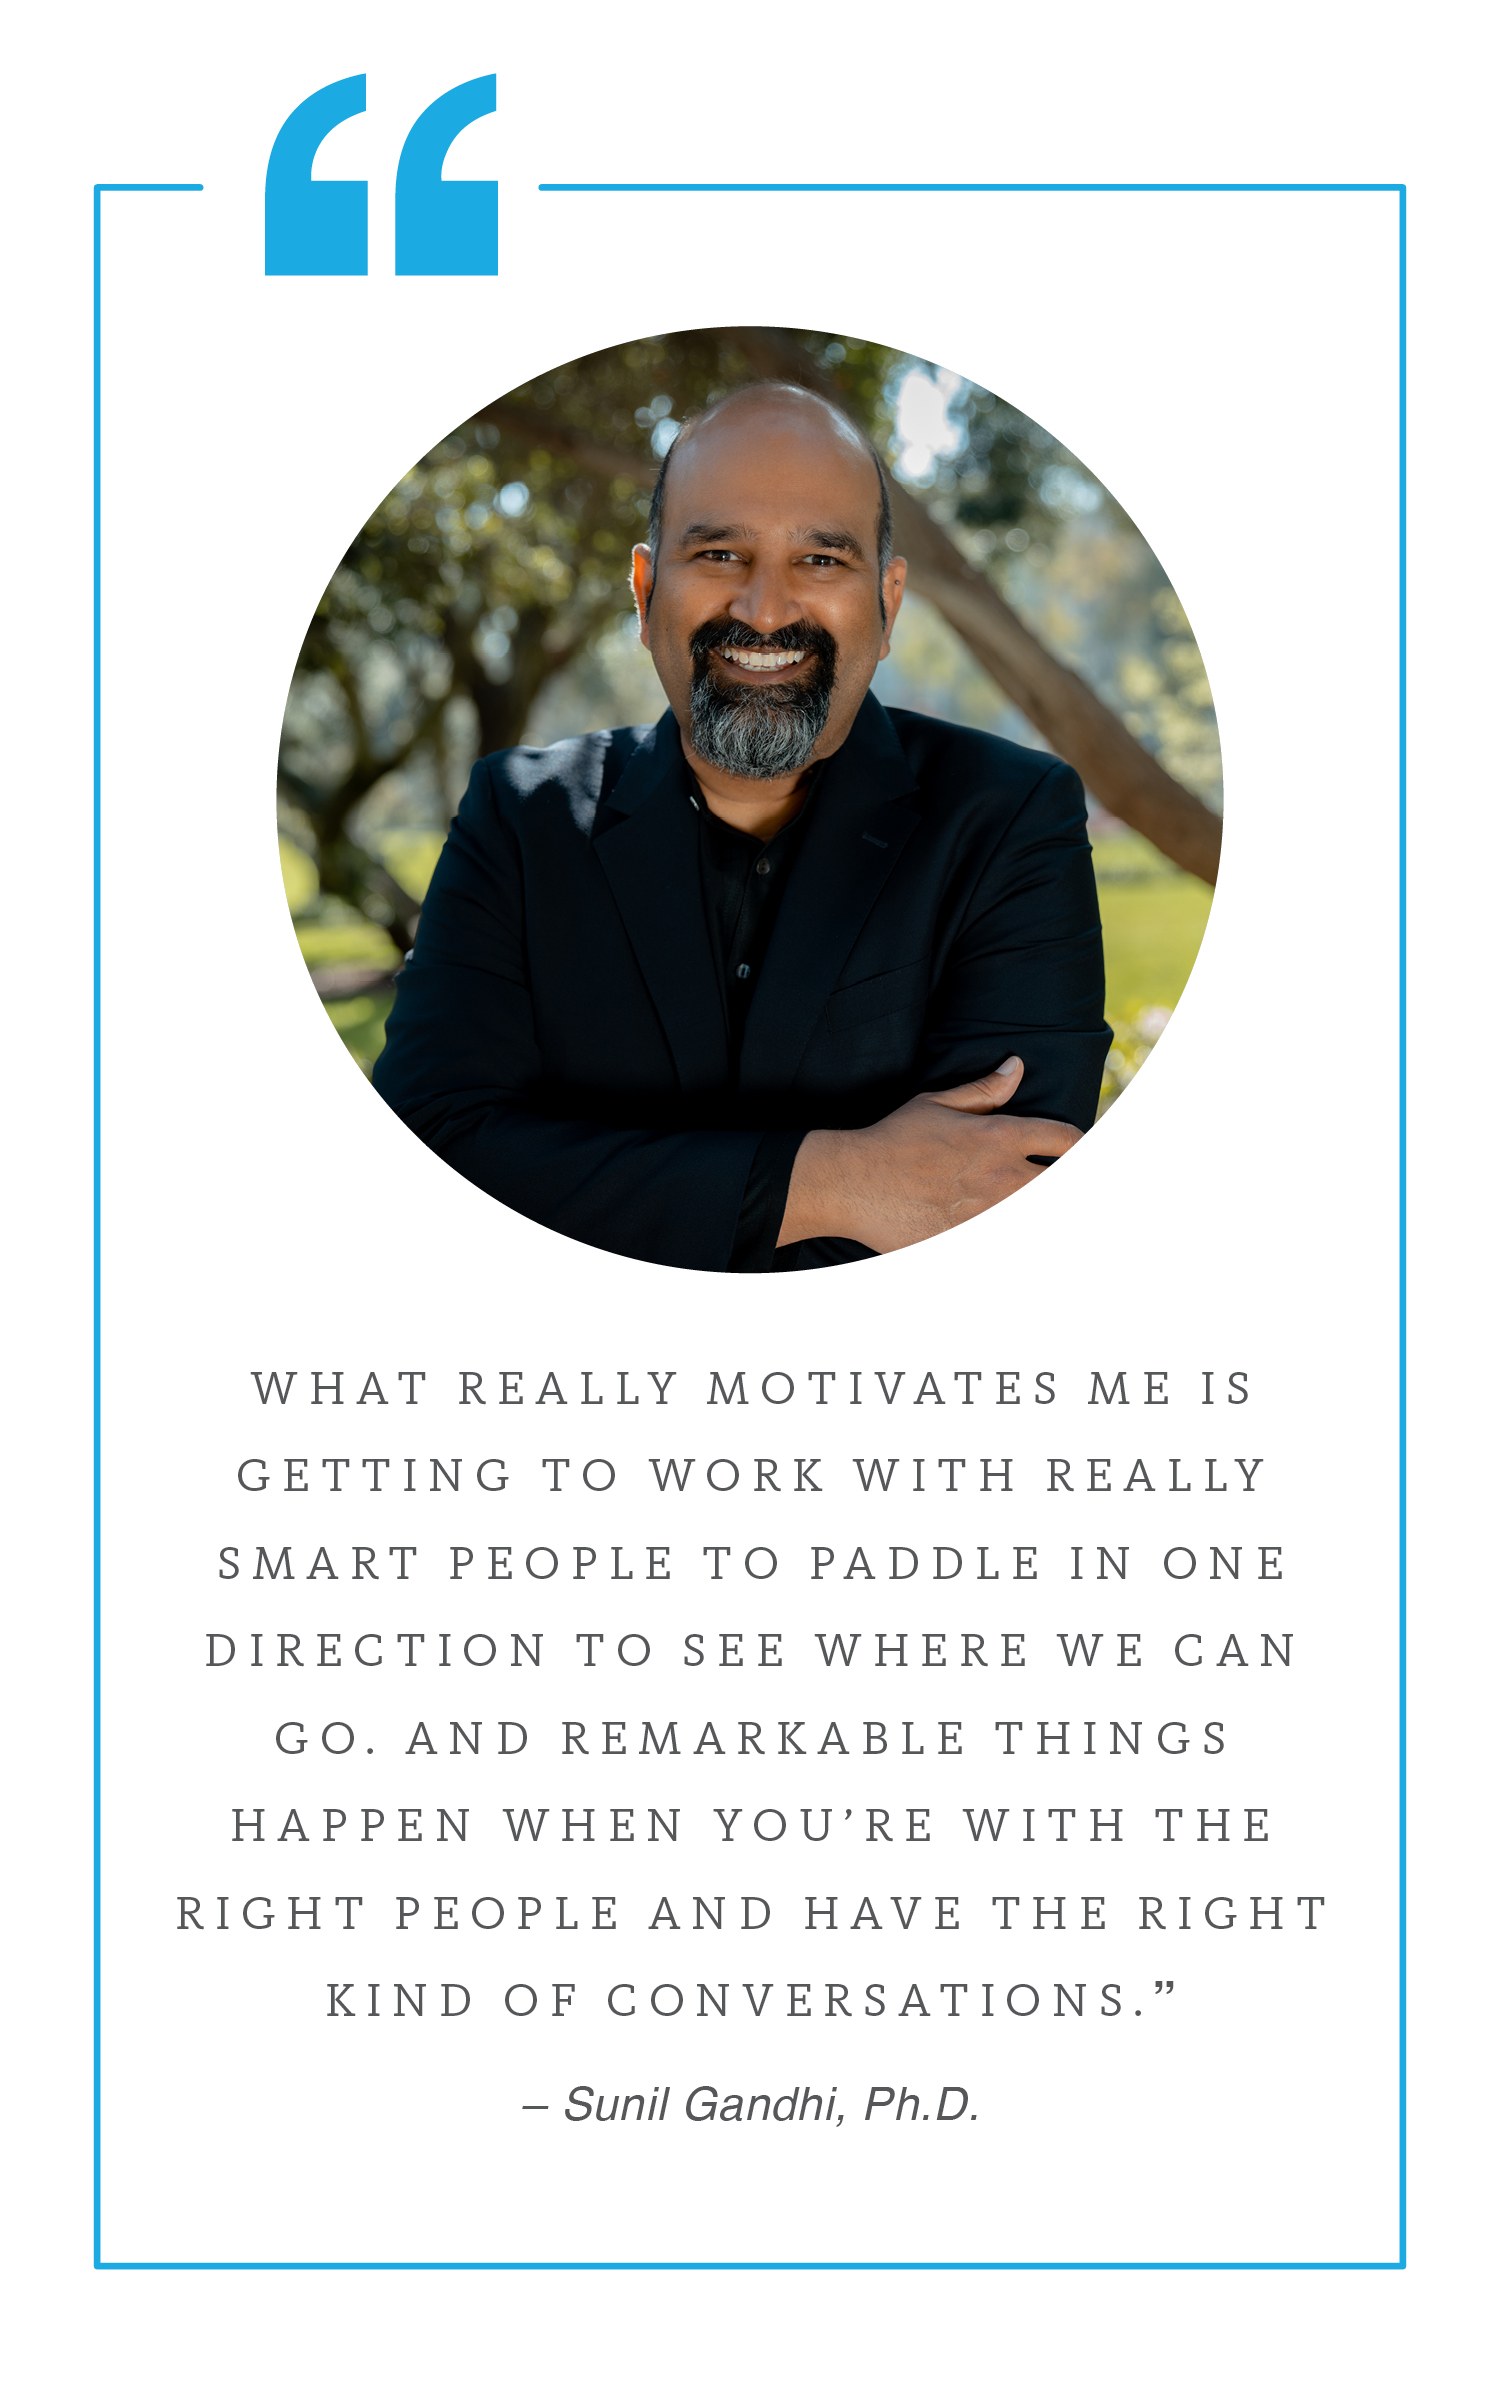 Quote by Sunil Gandhi: “What really motivates me is getting to work with really smart people to paddle in one direction to see where we can go. And remarkable things happen when you’re with the right people and have the right kind of conversations.”